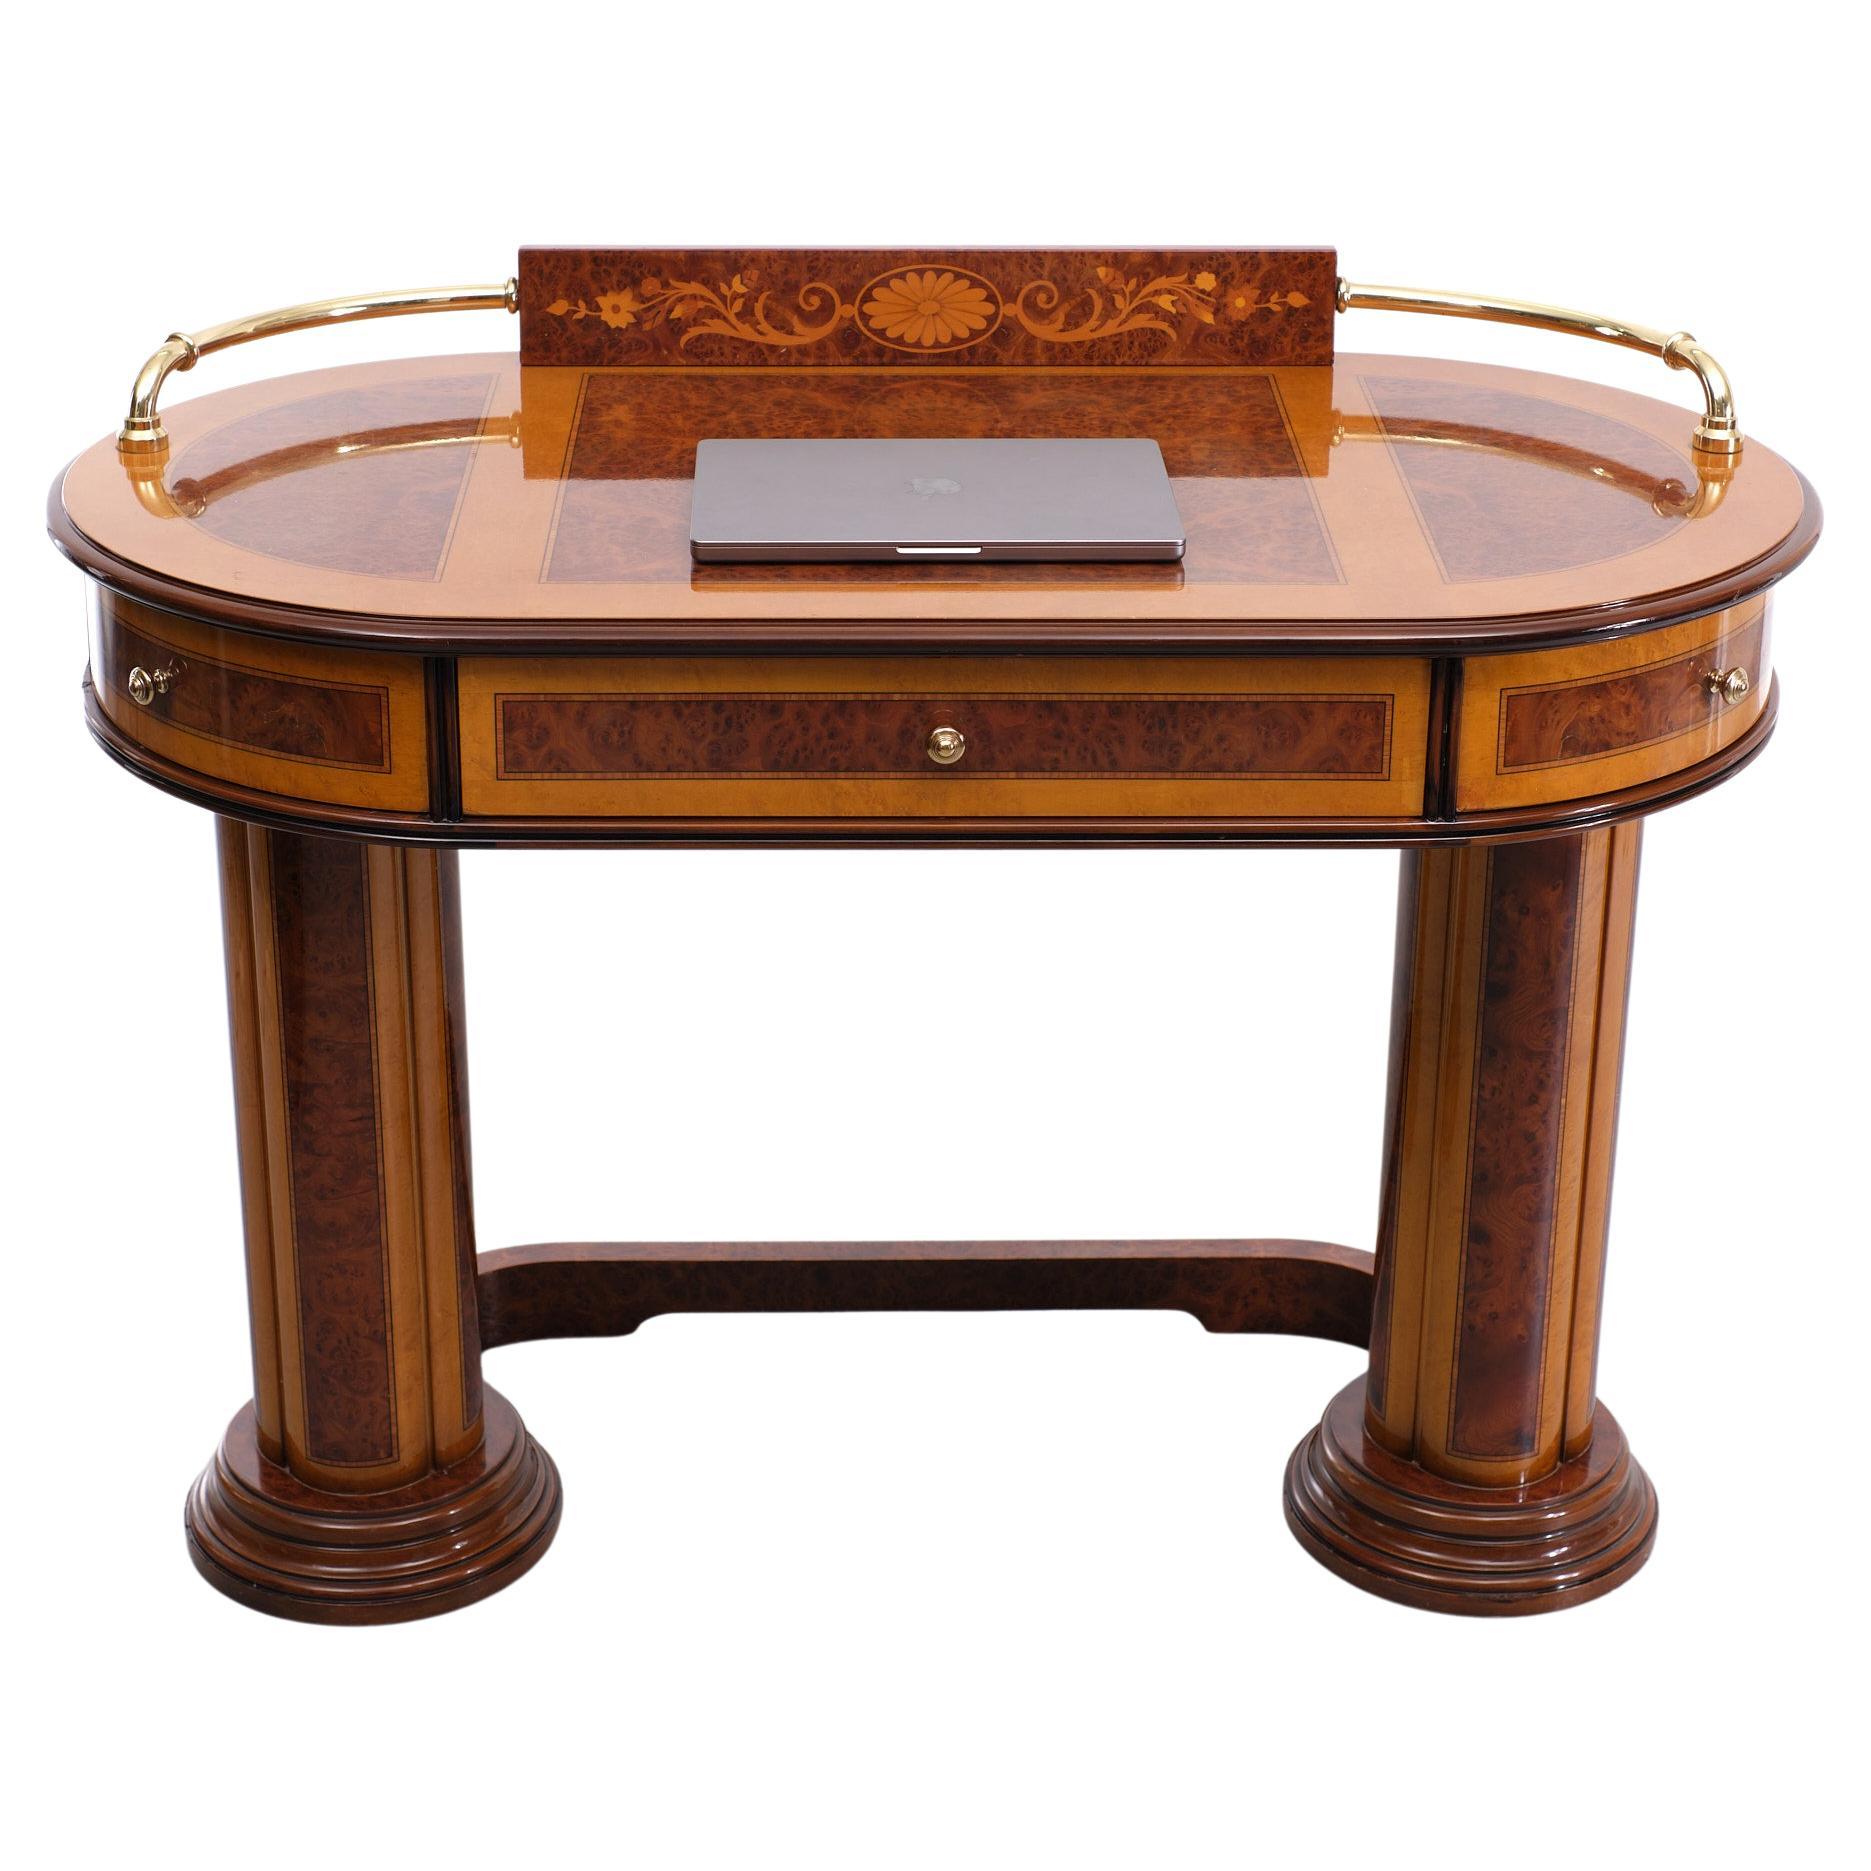 Beautiful oval shaped ladies desk. Burl wood, comes with all kind off different Fruit wood inlay High gloss finish. Stands on Columns. Three drawers 
Two on the rounding and one in the middle. Brass details. Well made furniture.
makers piece.